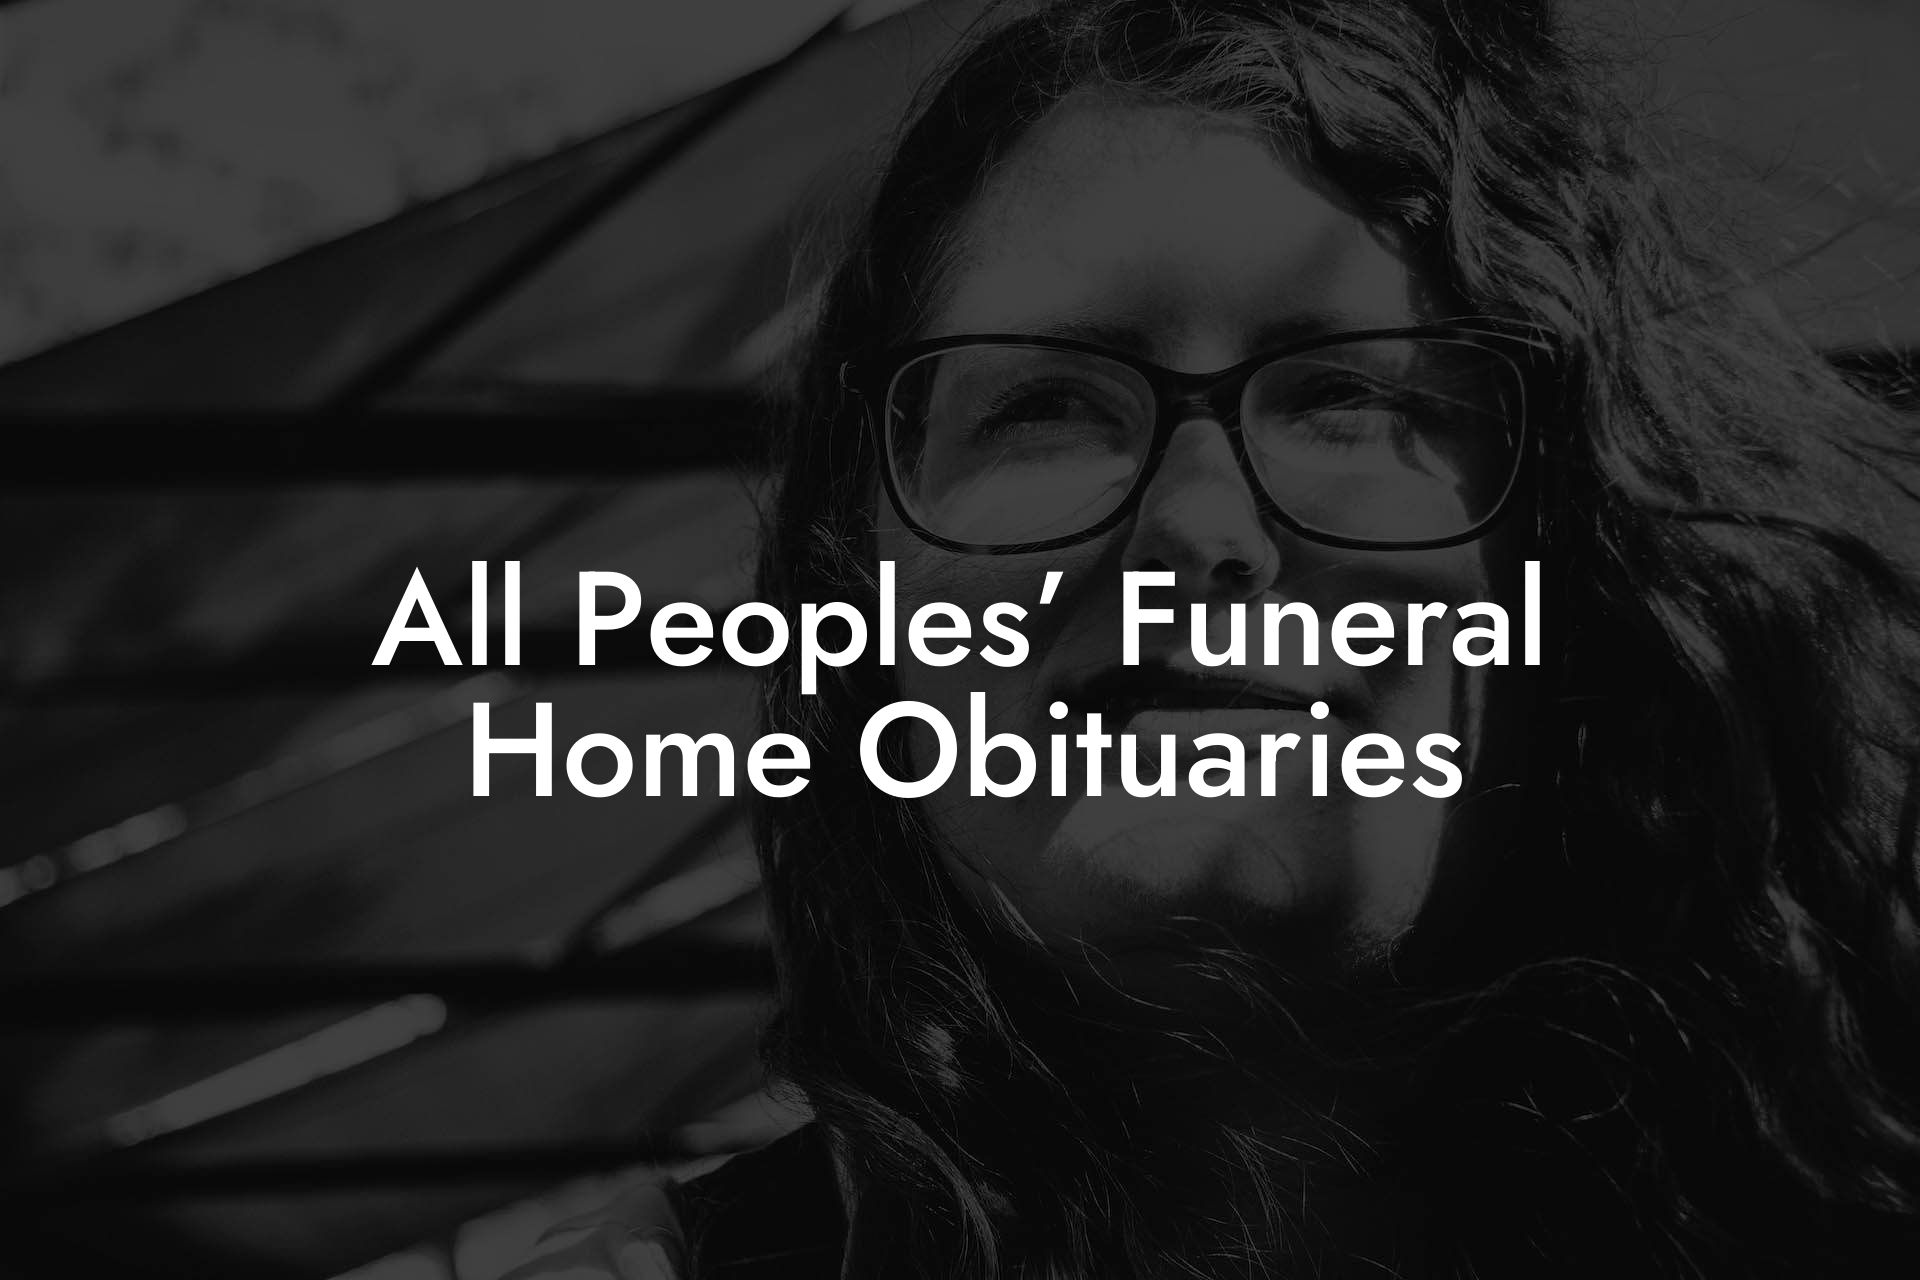 All Peoples' Funeral Home Obituaries